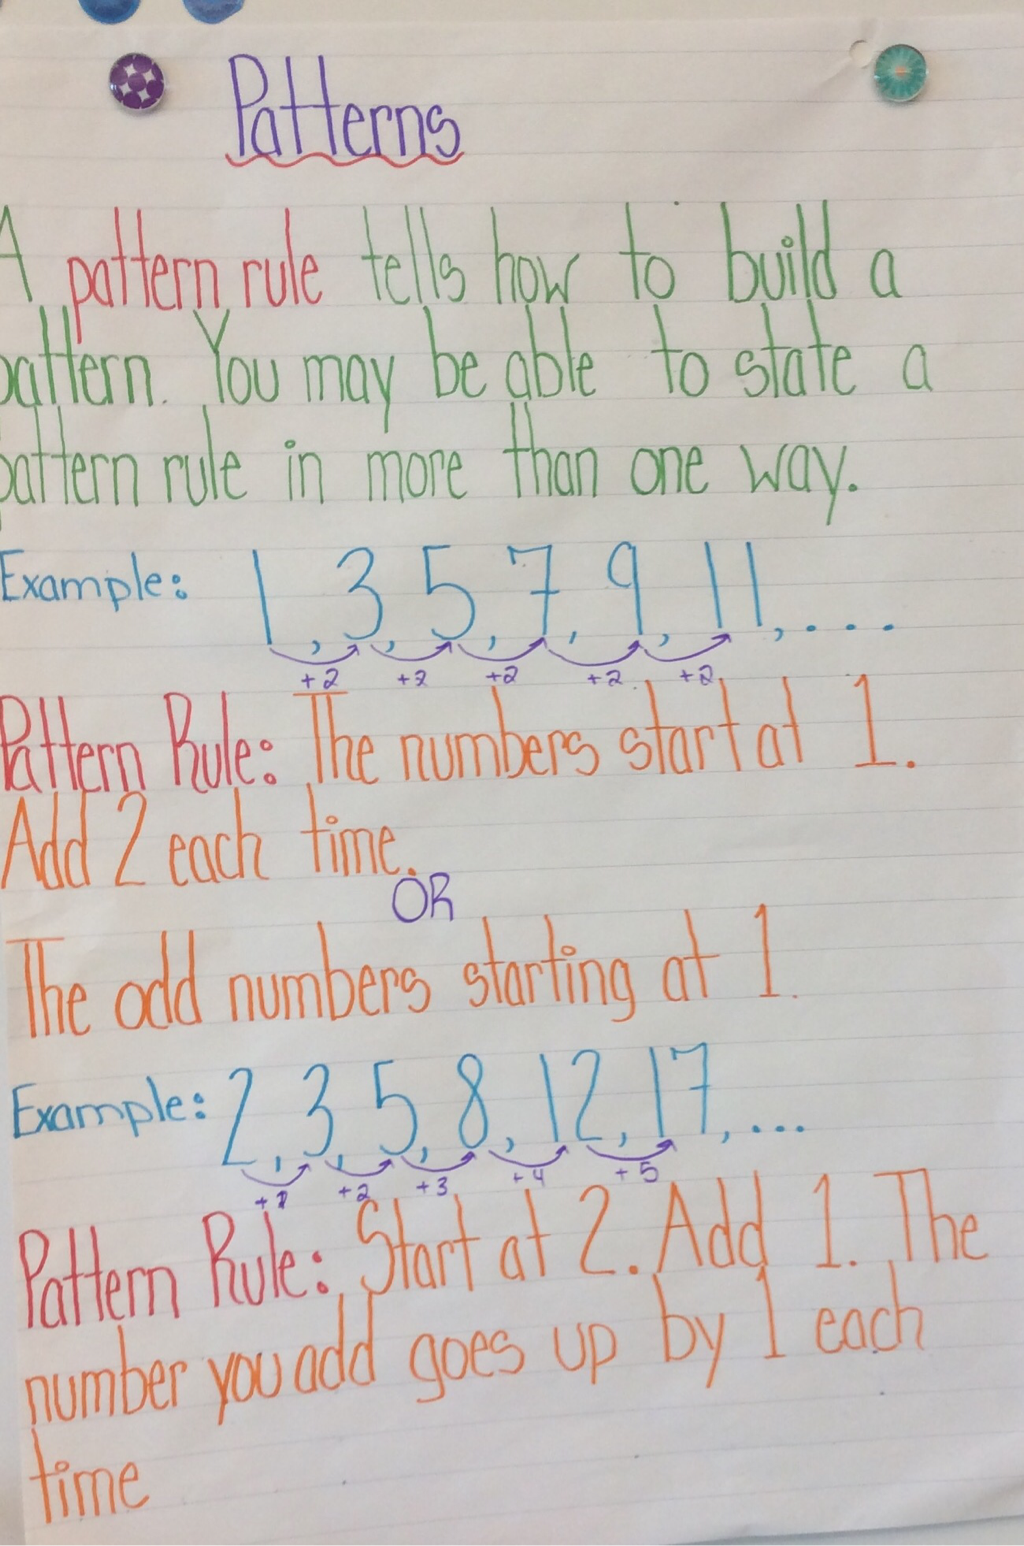 Unit 10 Patterns In Numbers And Geometry Mrs Ferrari s Grade 3 Class 